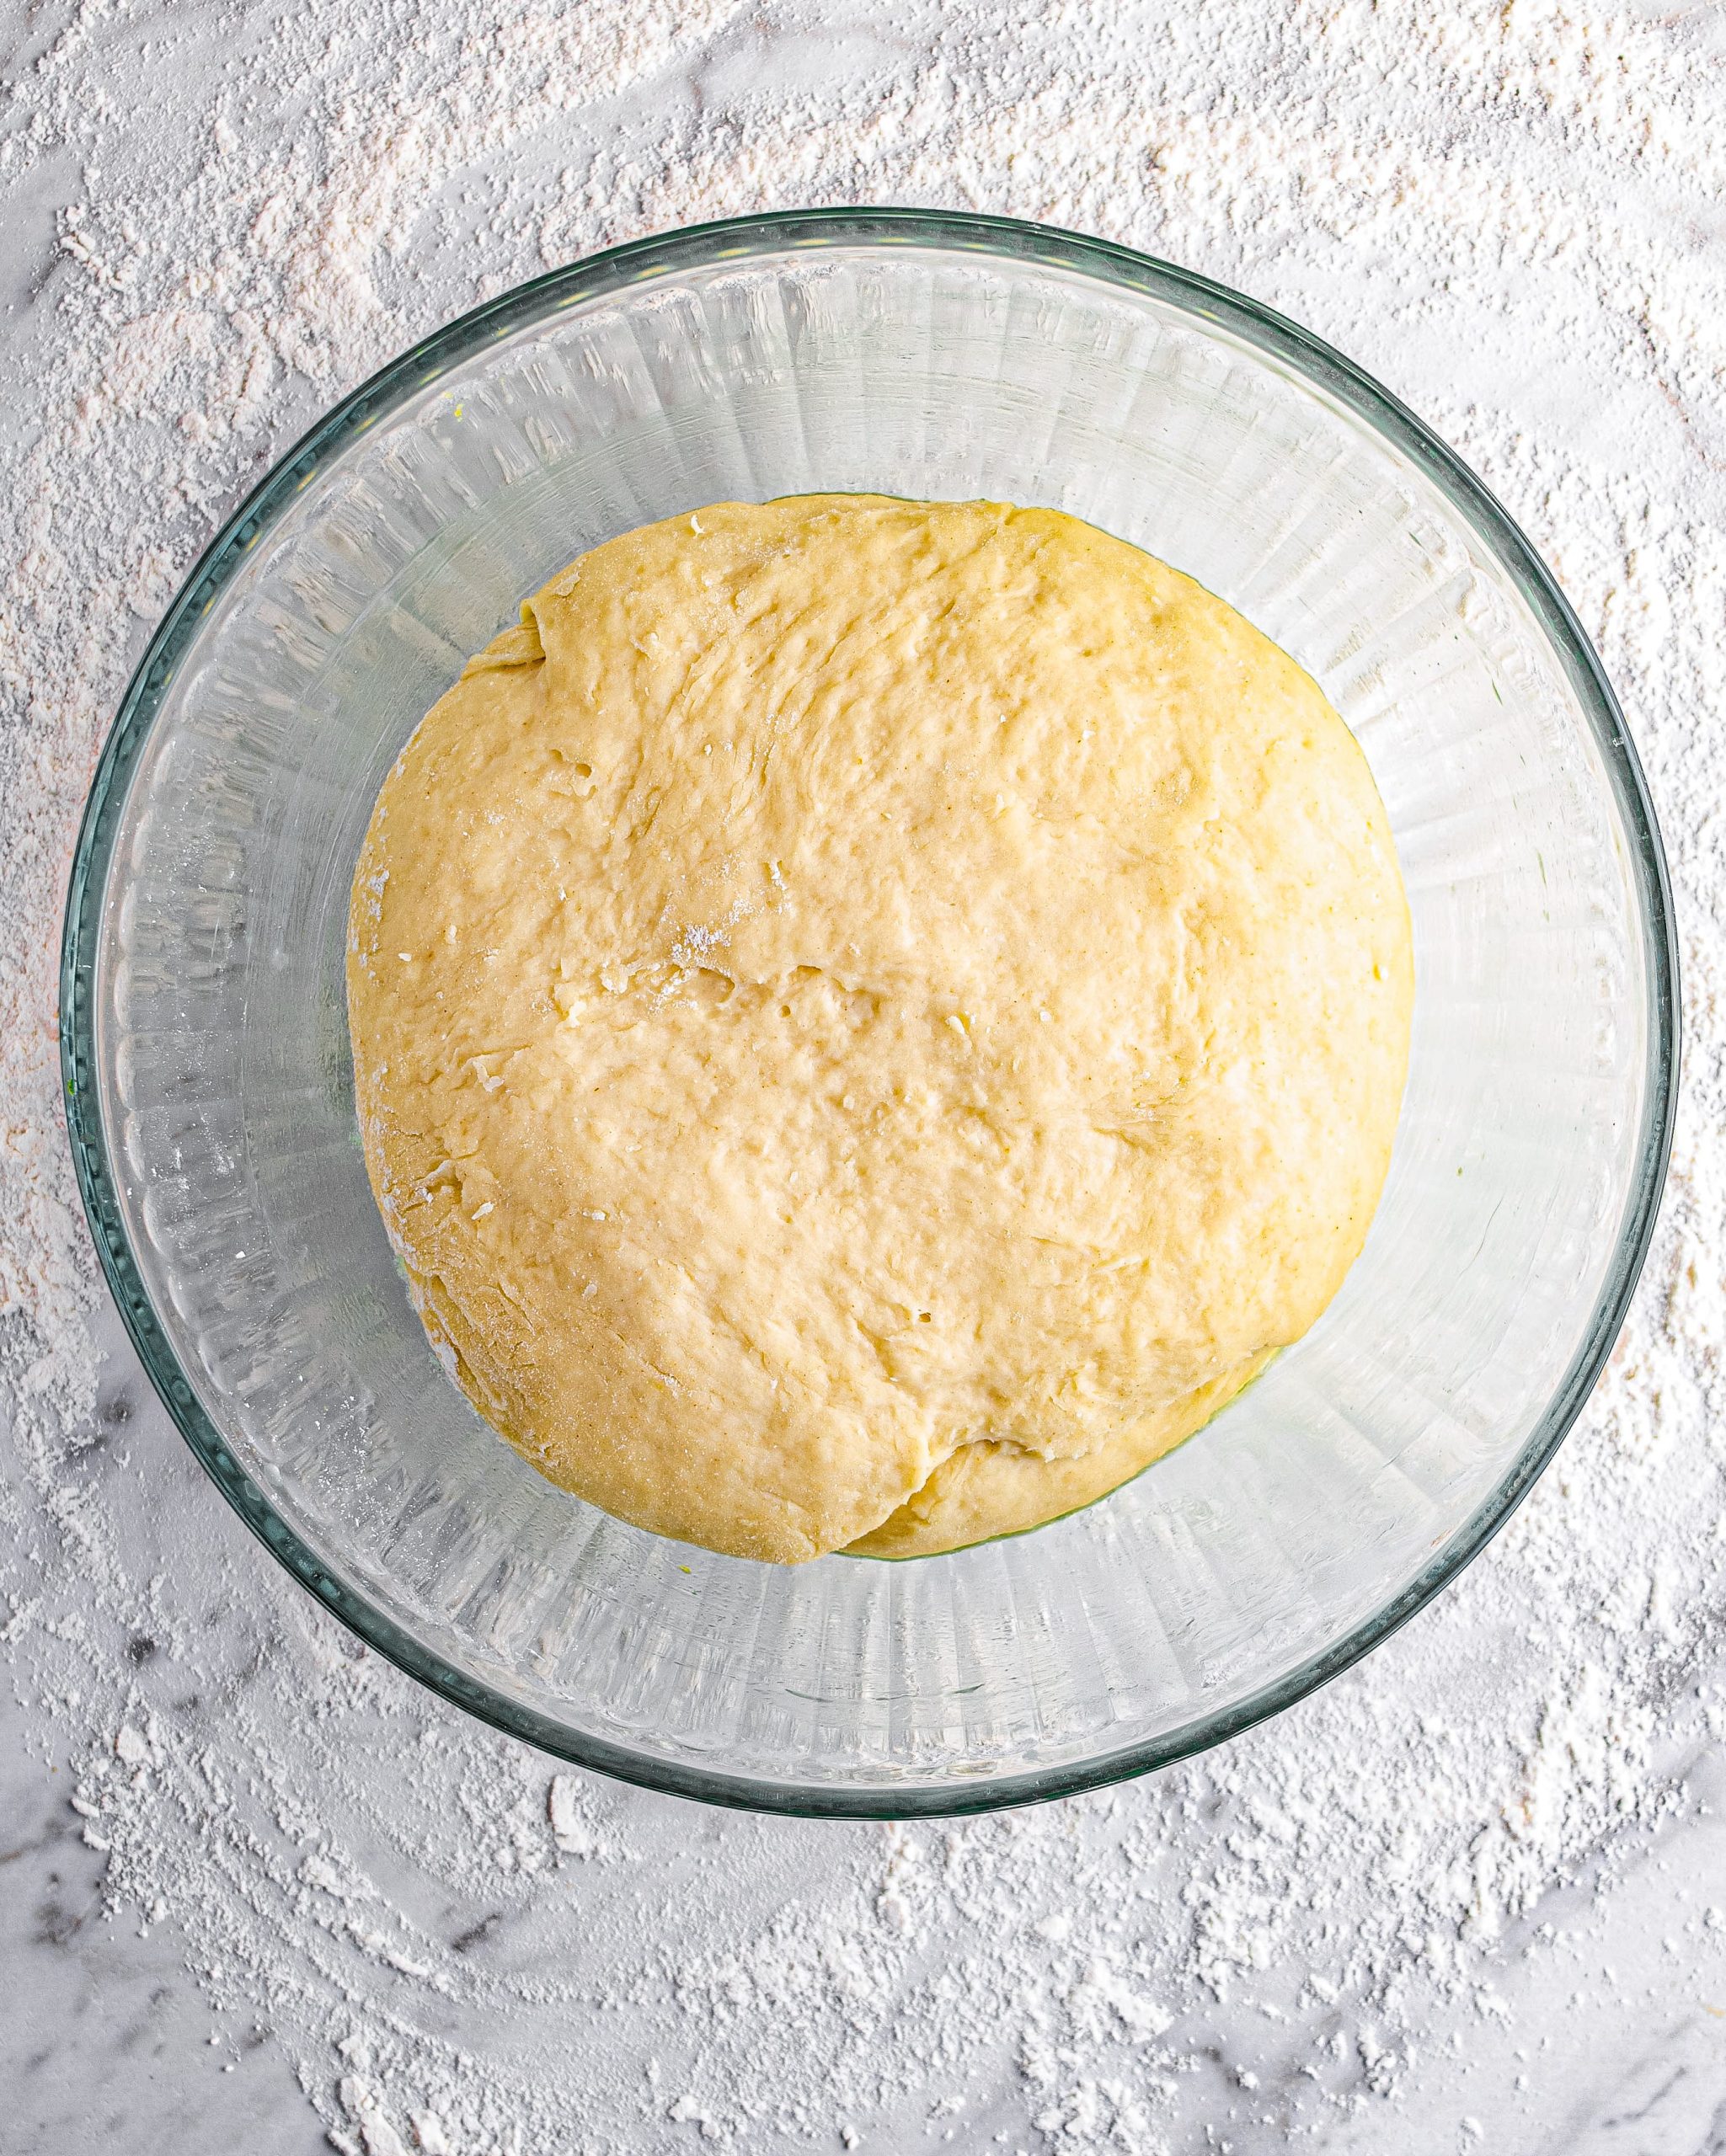 Put the dough into a bowl that has been greased, and cover. Allow the dough to rise in a warm area for an hour.